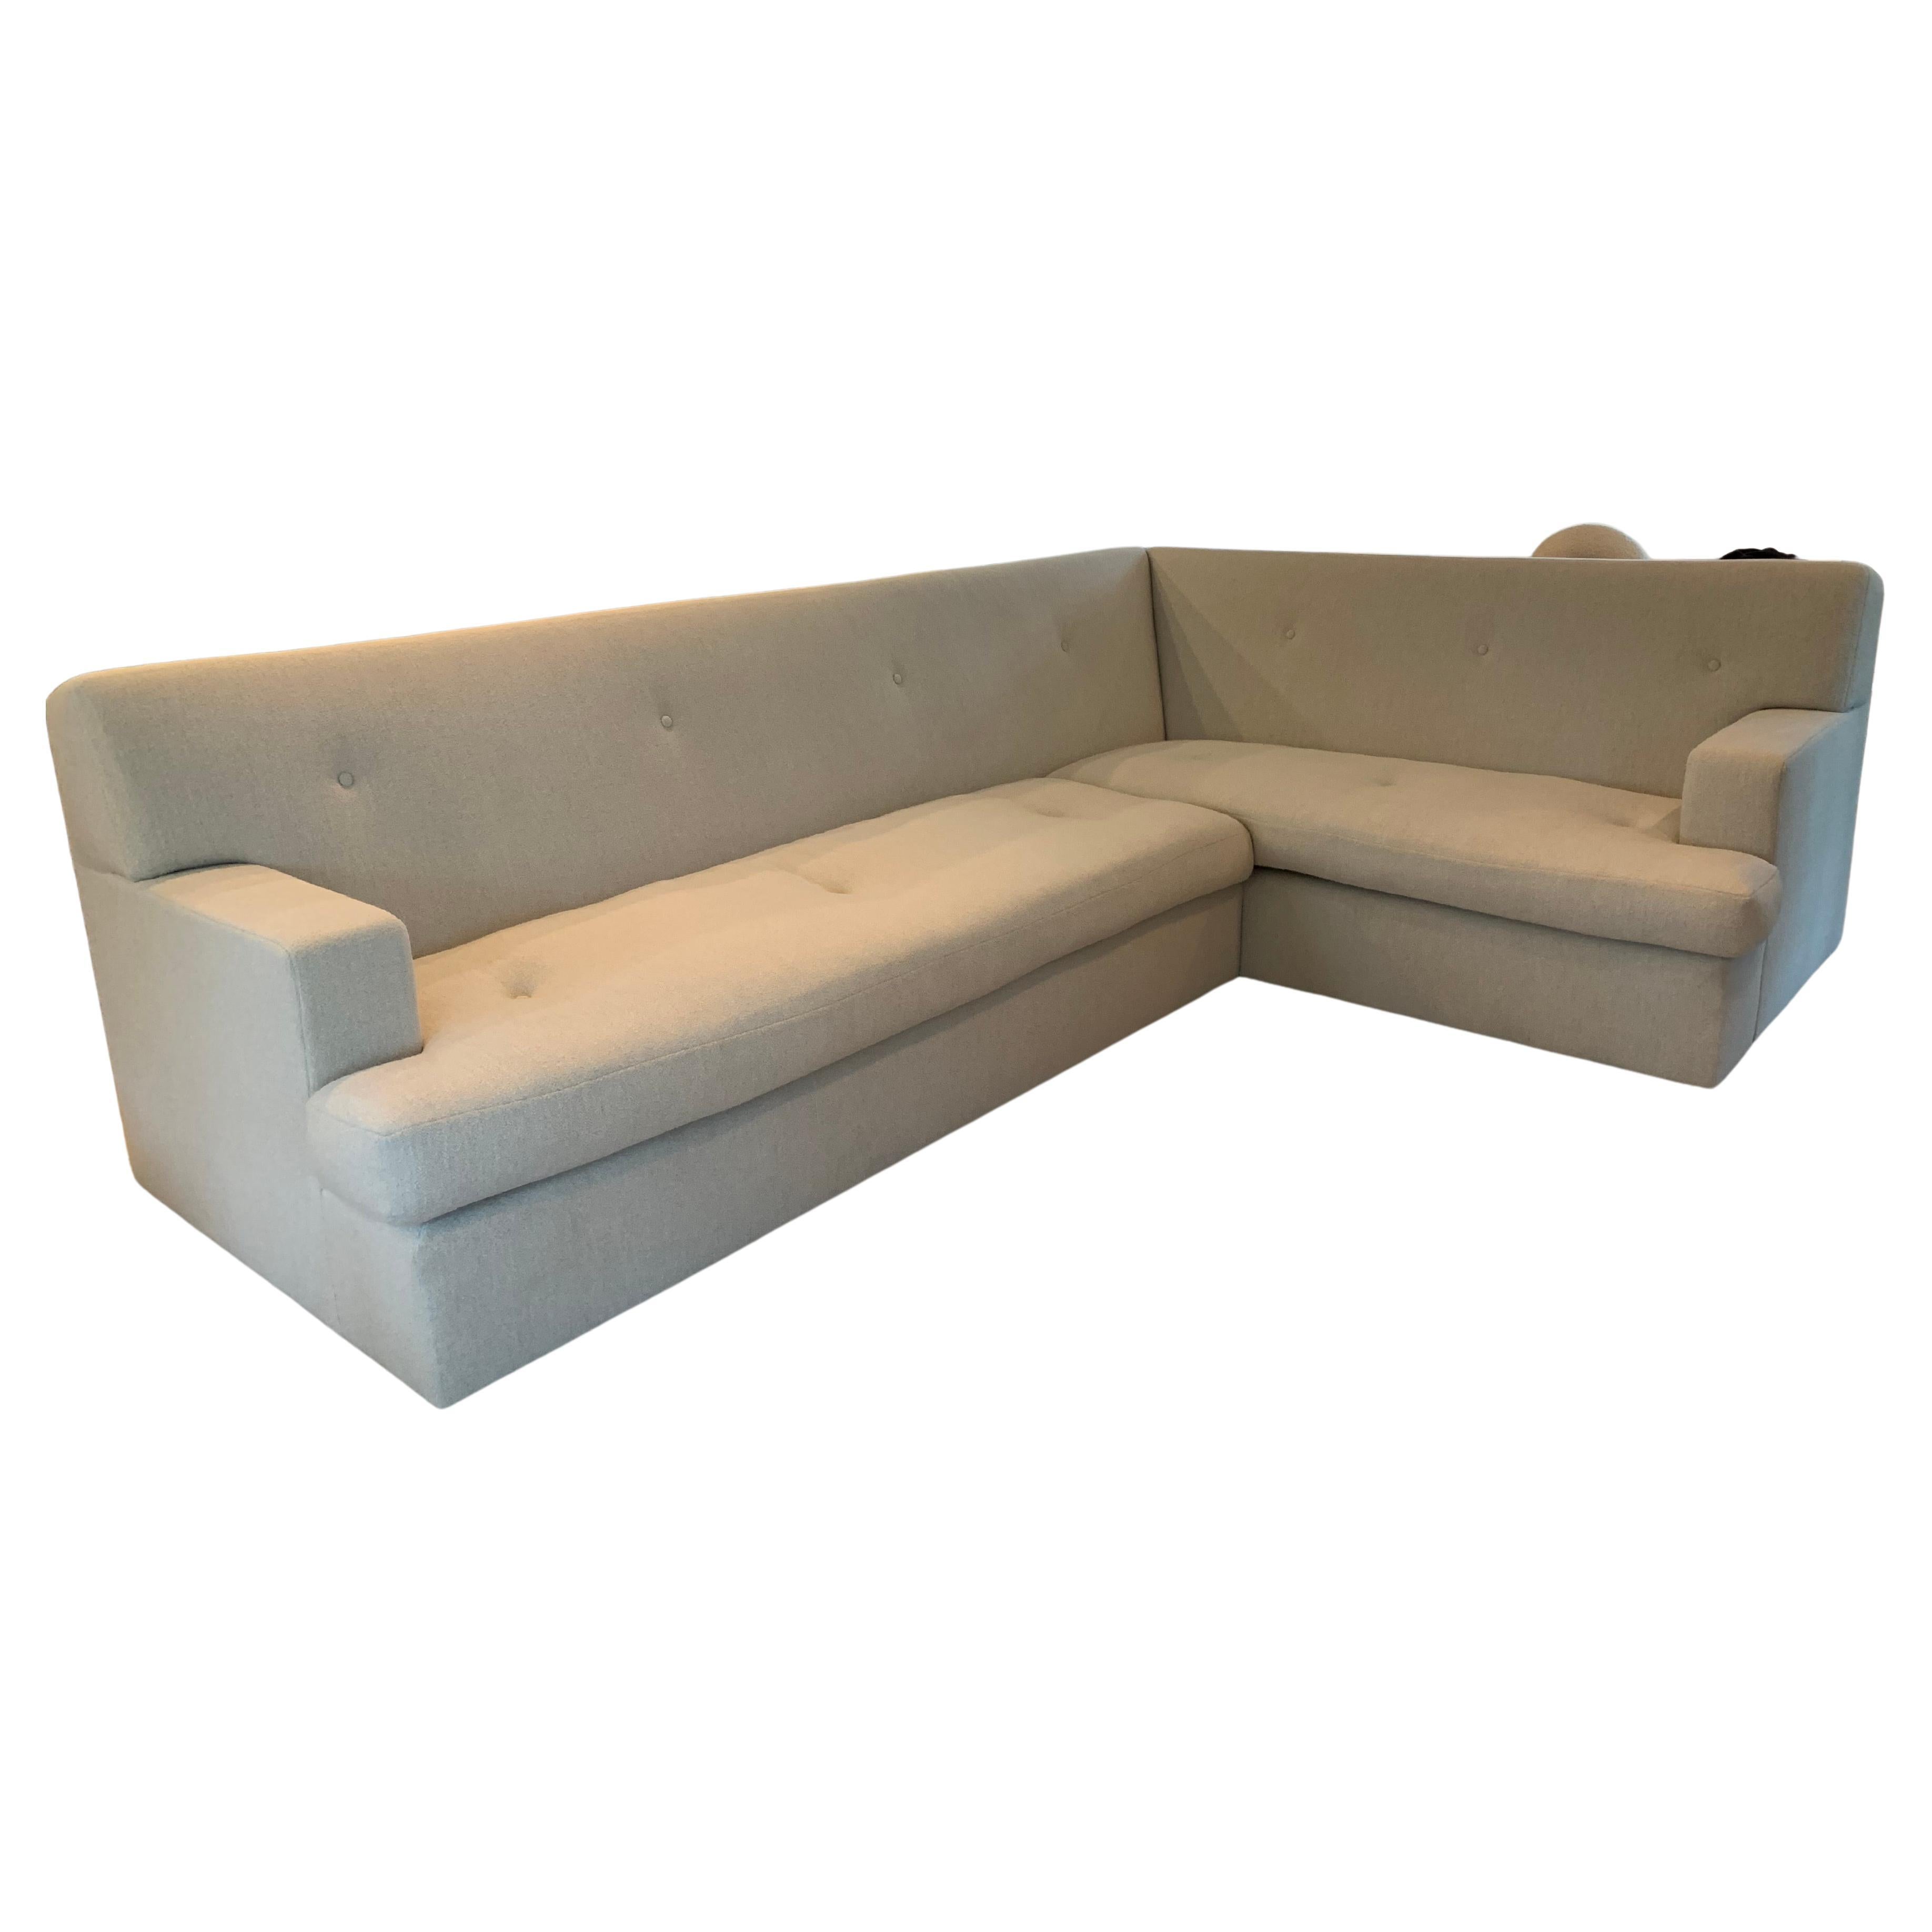 Bespoke Sectional Sofa For Sale